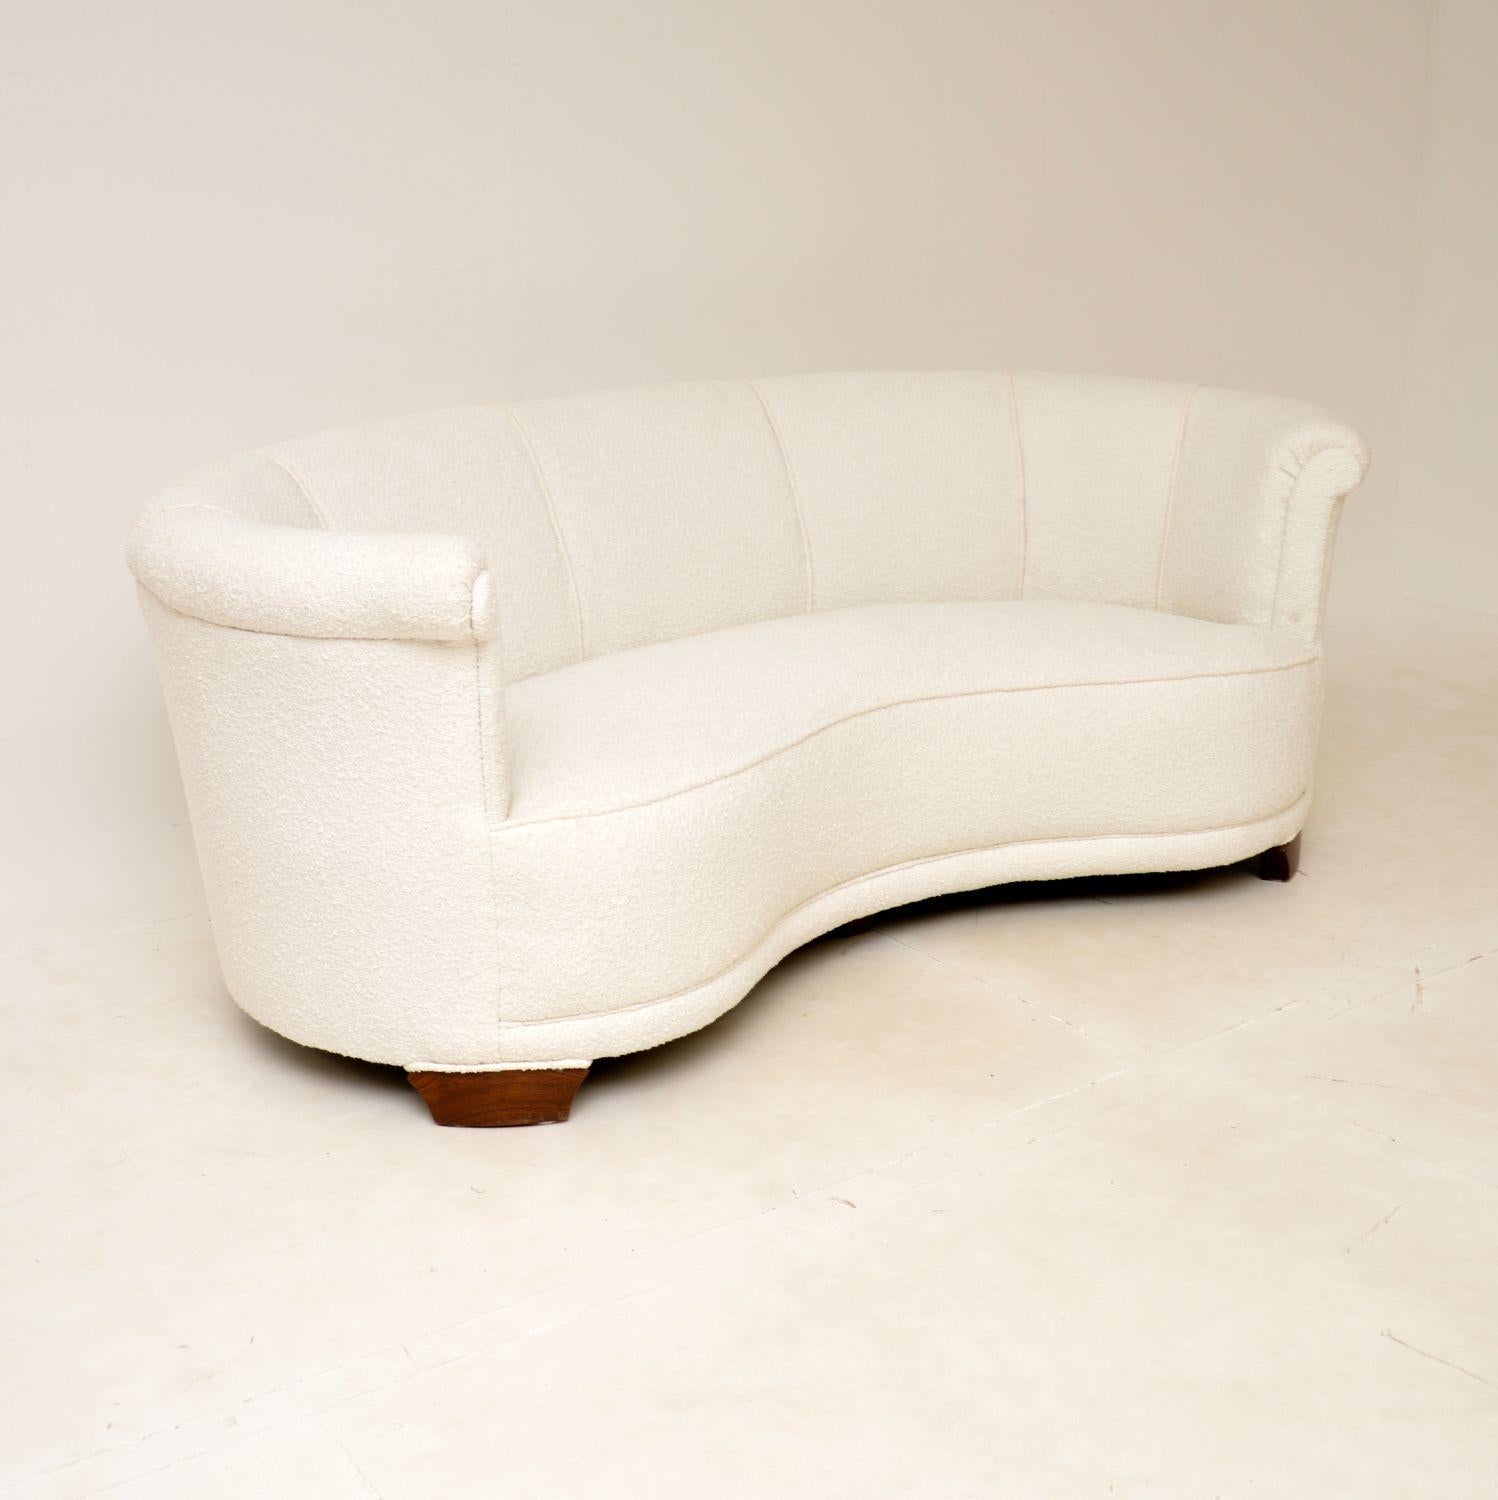 A fantastic vintage Danish curved banana sofa from the 1940s.

This is of exceptional quality, it is a great size and has a lovely design. It is very comfortable, and looks great from all angles.

This sits on solid birch legs which have been